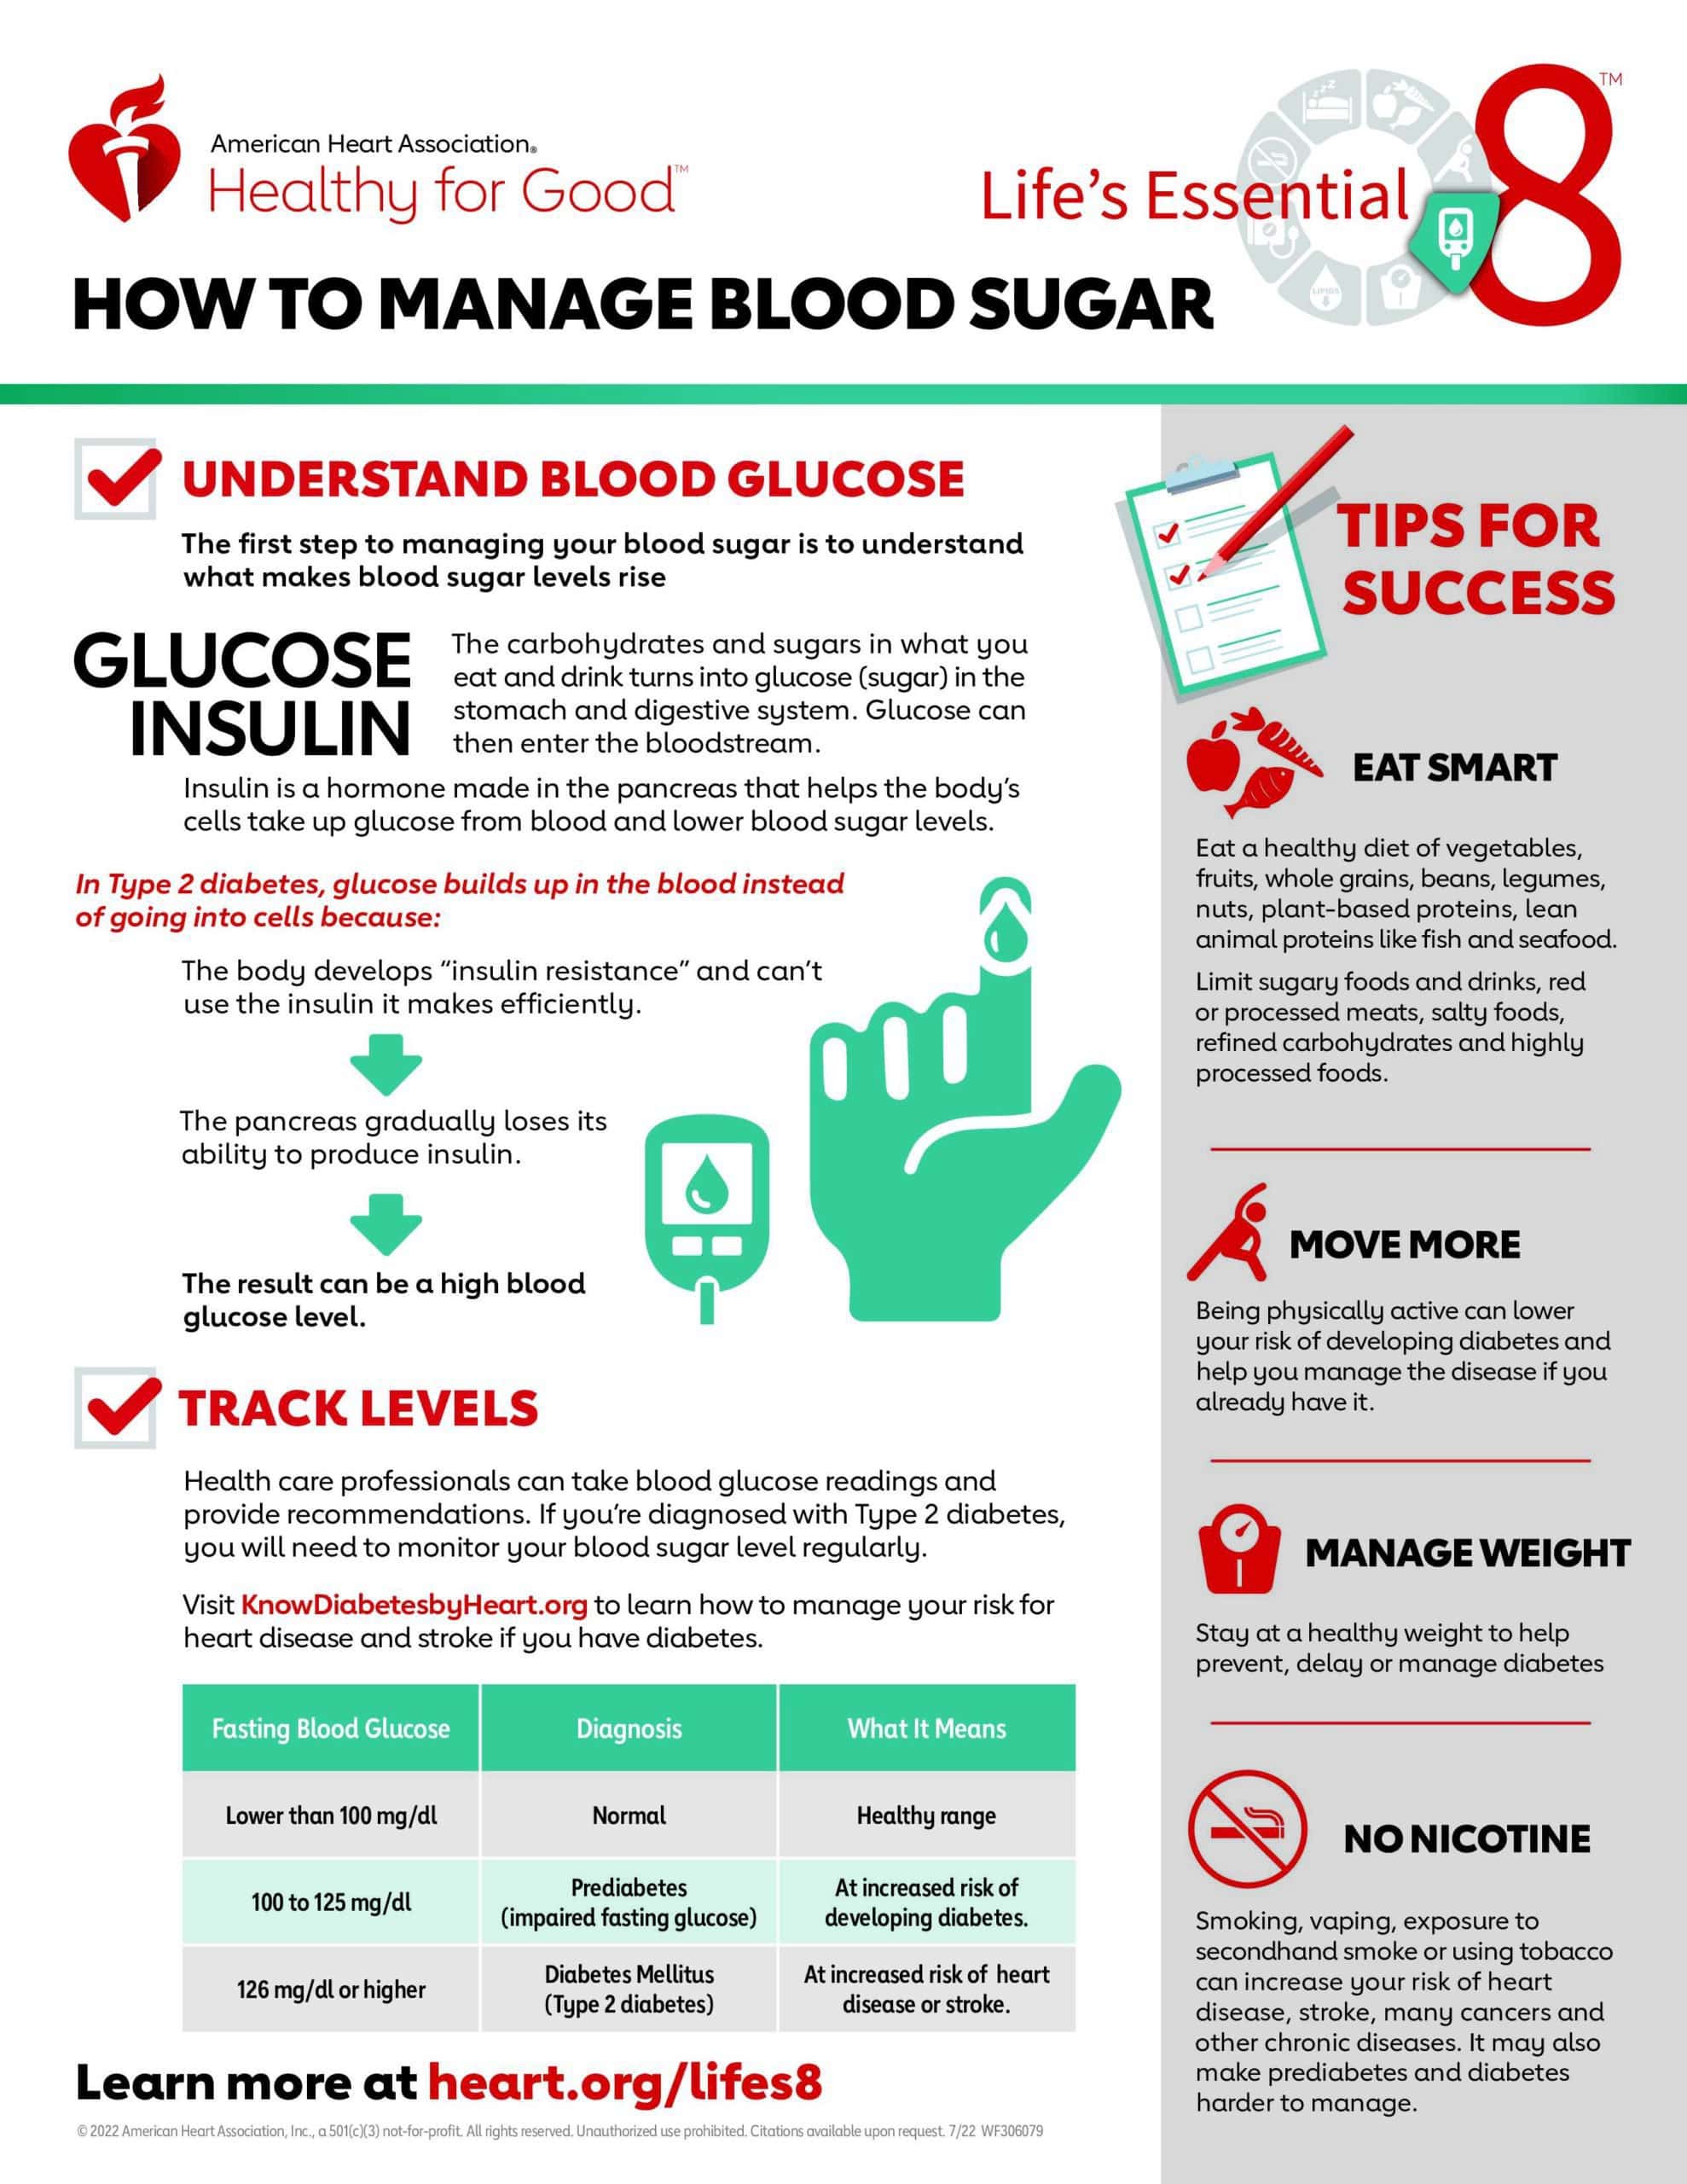 Manage blood sugar - Dr. Axe